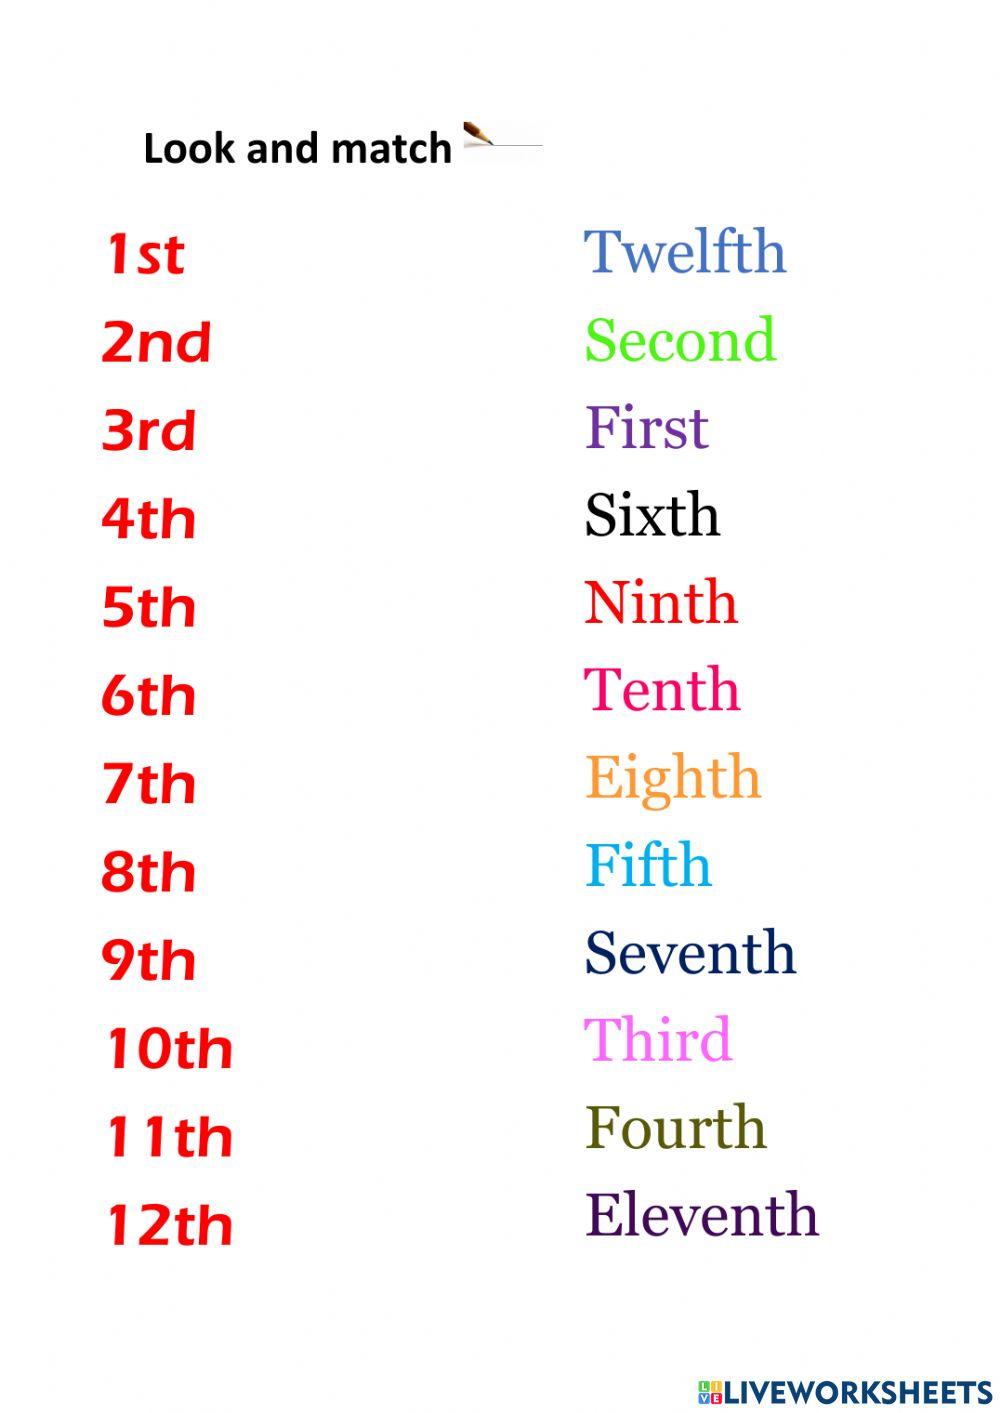 Ordinal numbers look and match